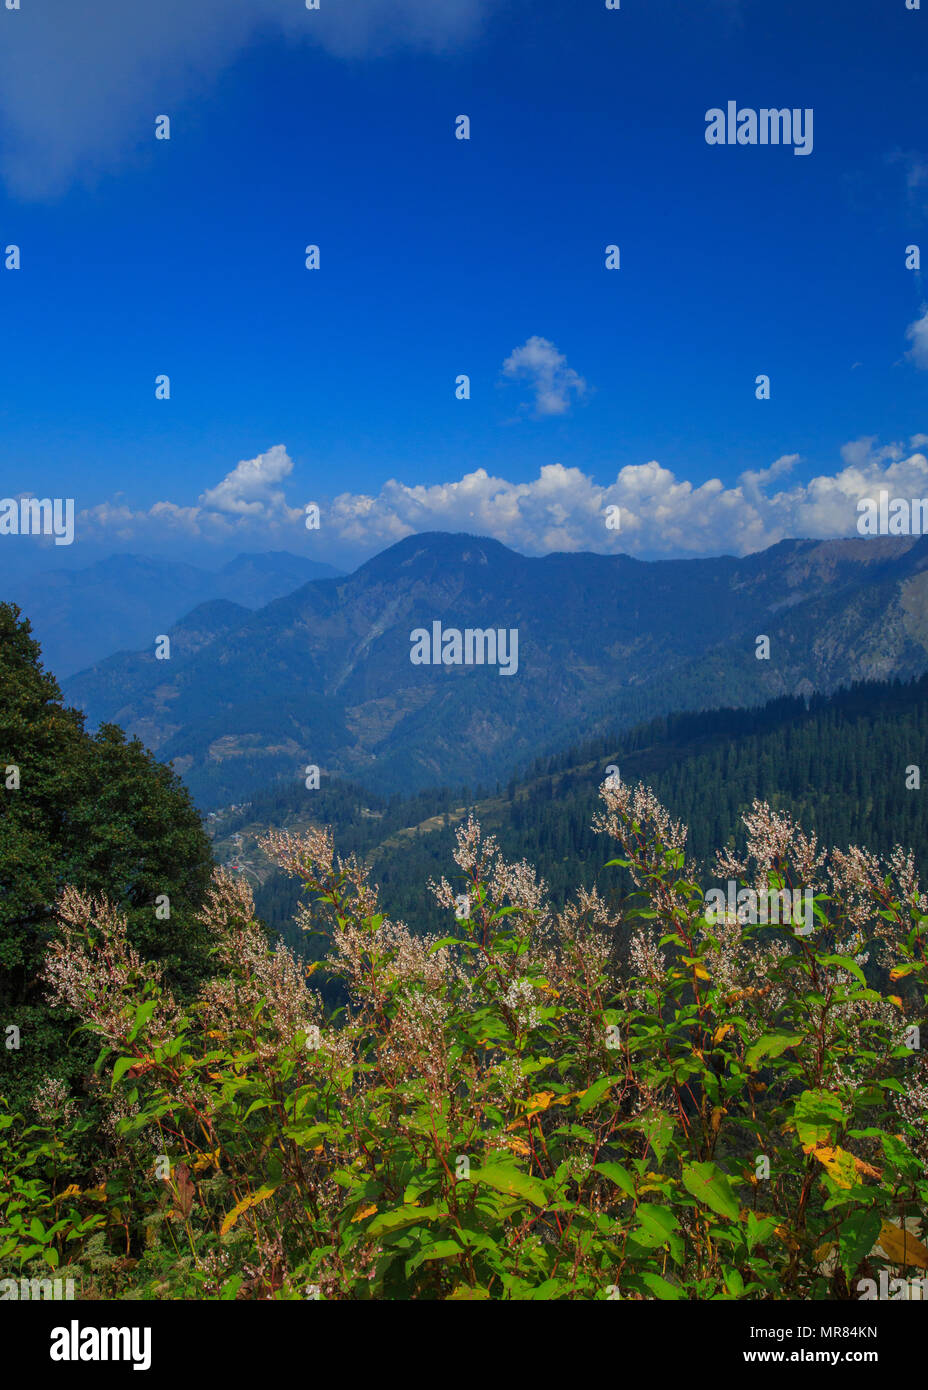 View of the Mountains - photographed from Jalori Pass (Himachal Pradesh, India) Stock Photo